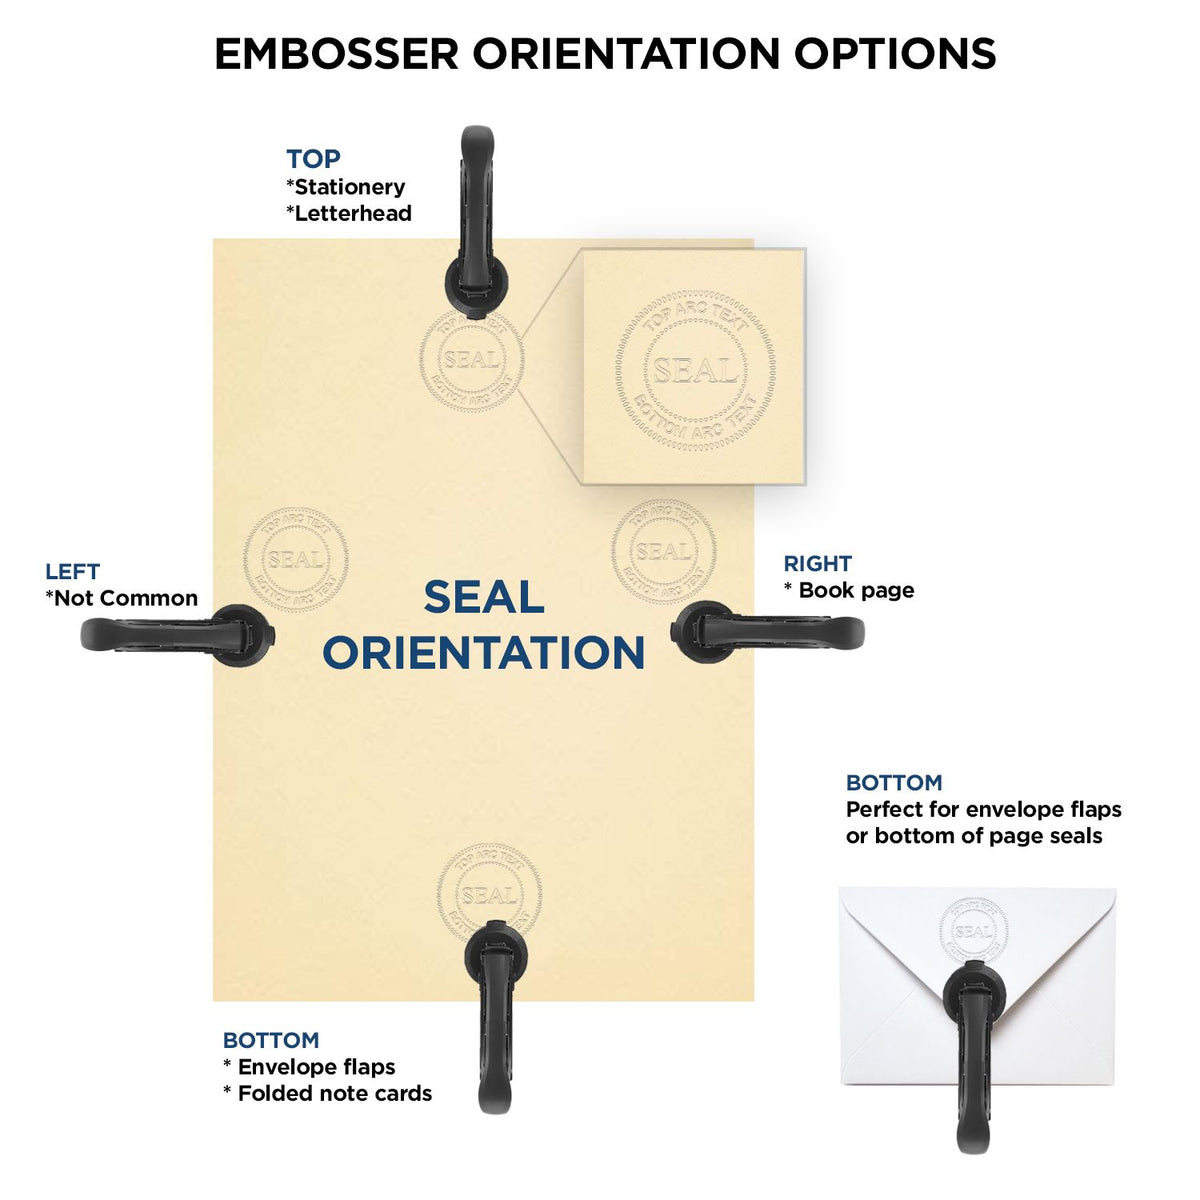 An infographic for the Long Reach Indiana PE Seal showing embosser orientation, this is showing examples of a top, bottom, right and left insert.